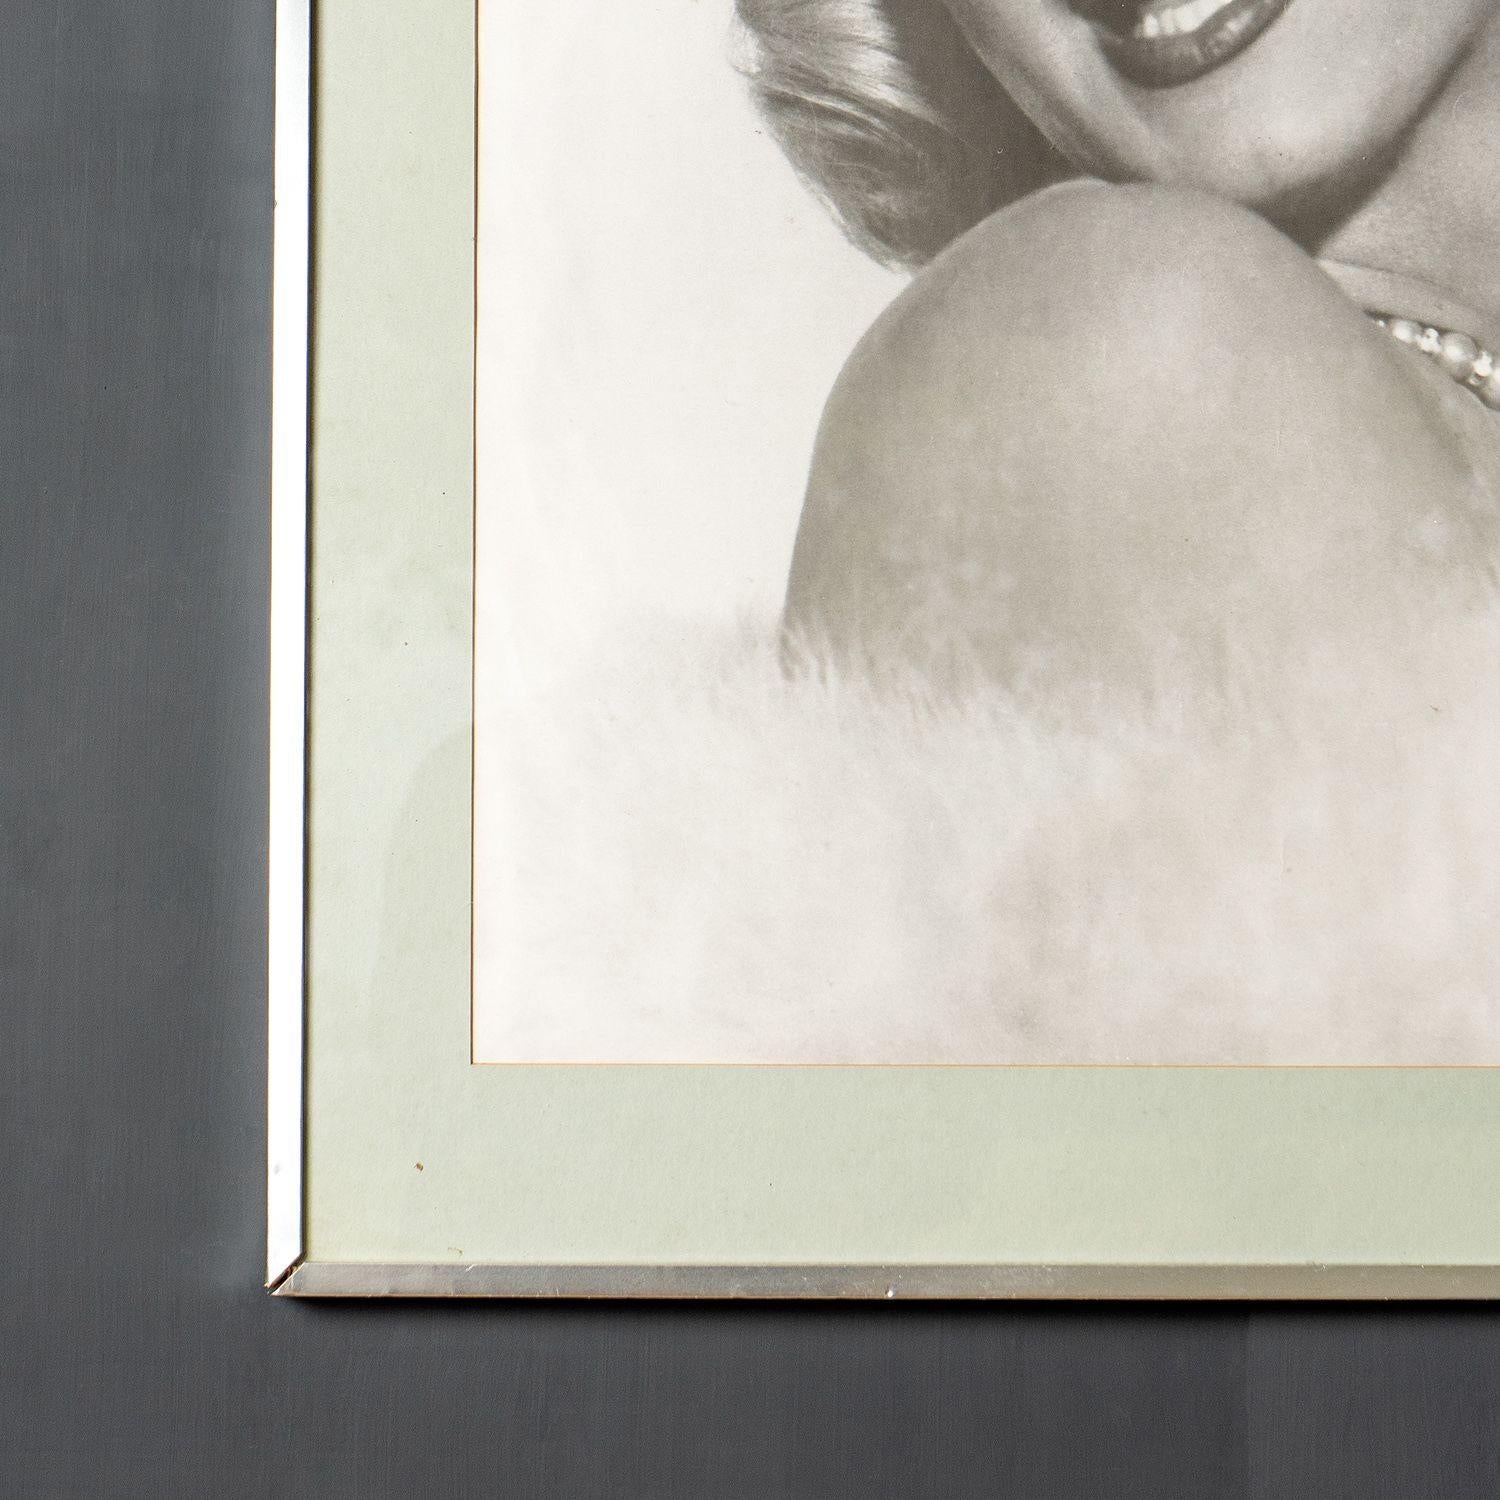 Paper Large Vintage Marilyn Monroe Photographic Portrait Print by Frank Powolny, 1970s For Sale